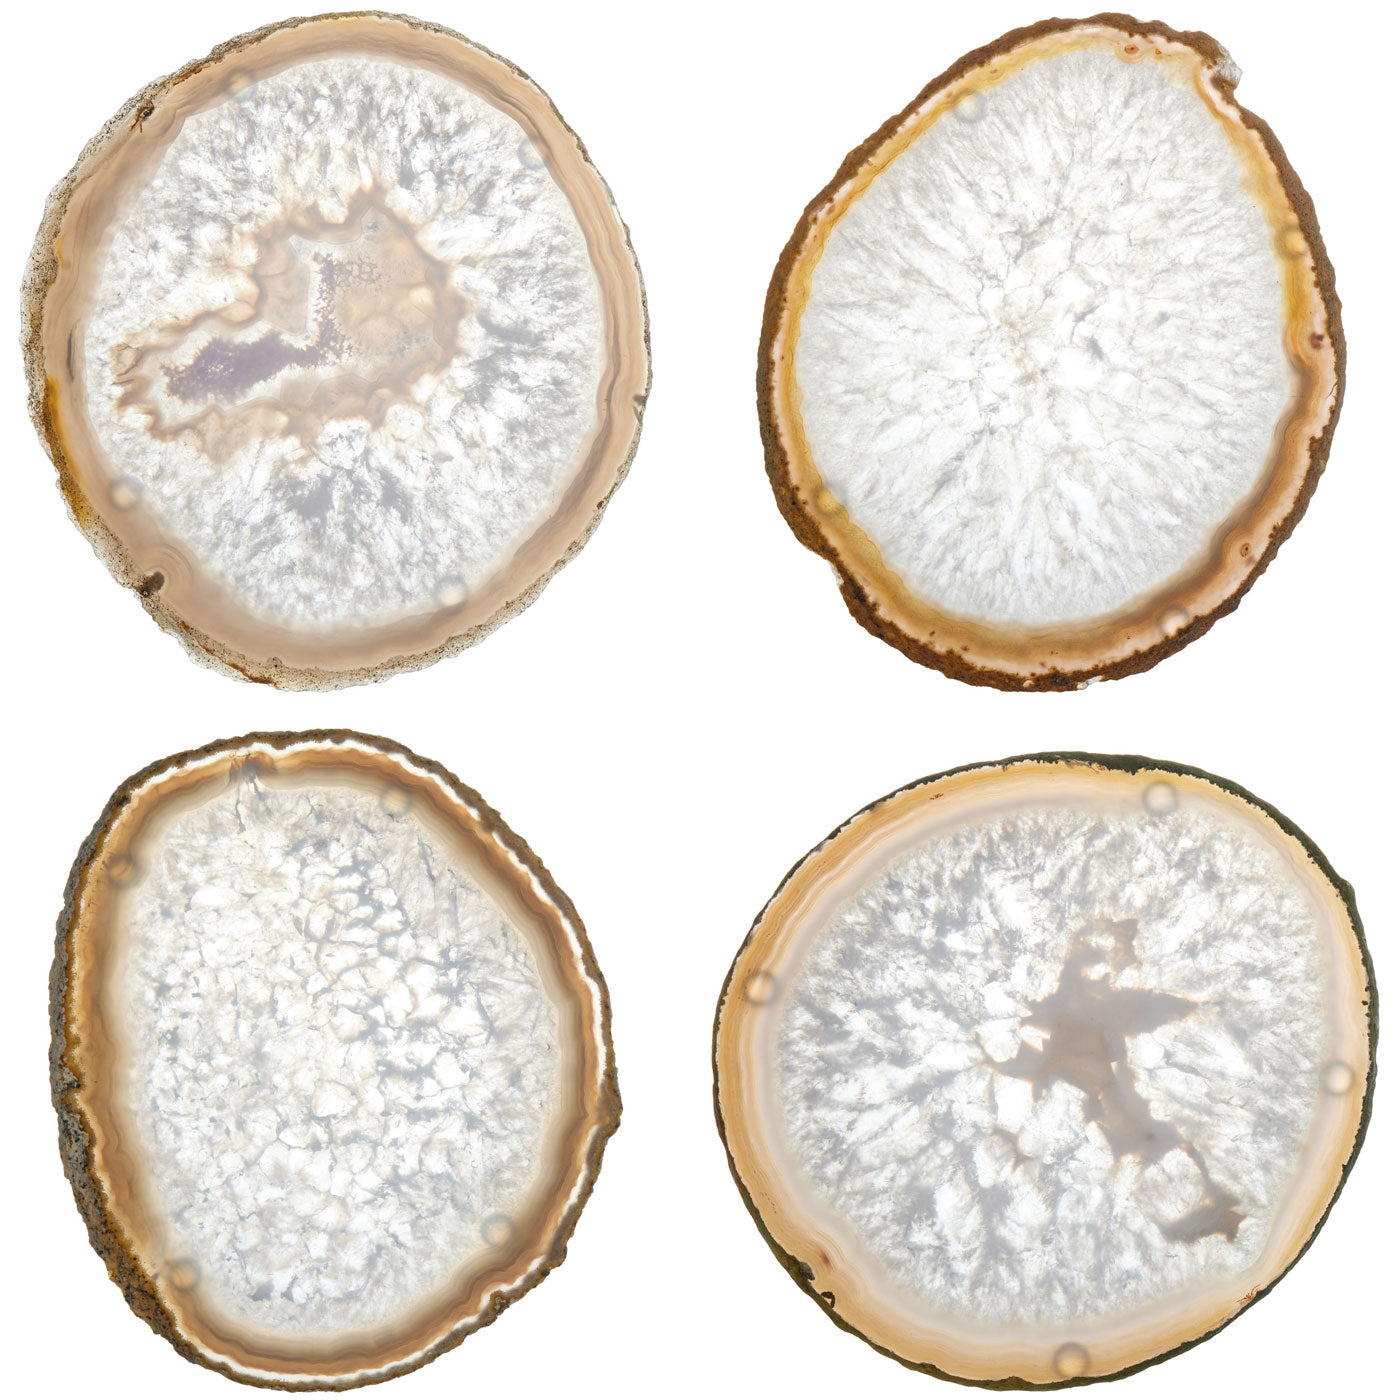 Set of 4 Natural Brazilian Agate Drink Coasters with Wood Holder - Natural